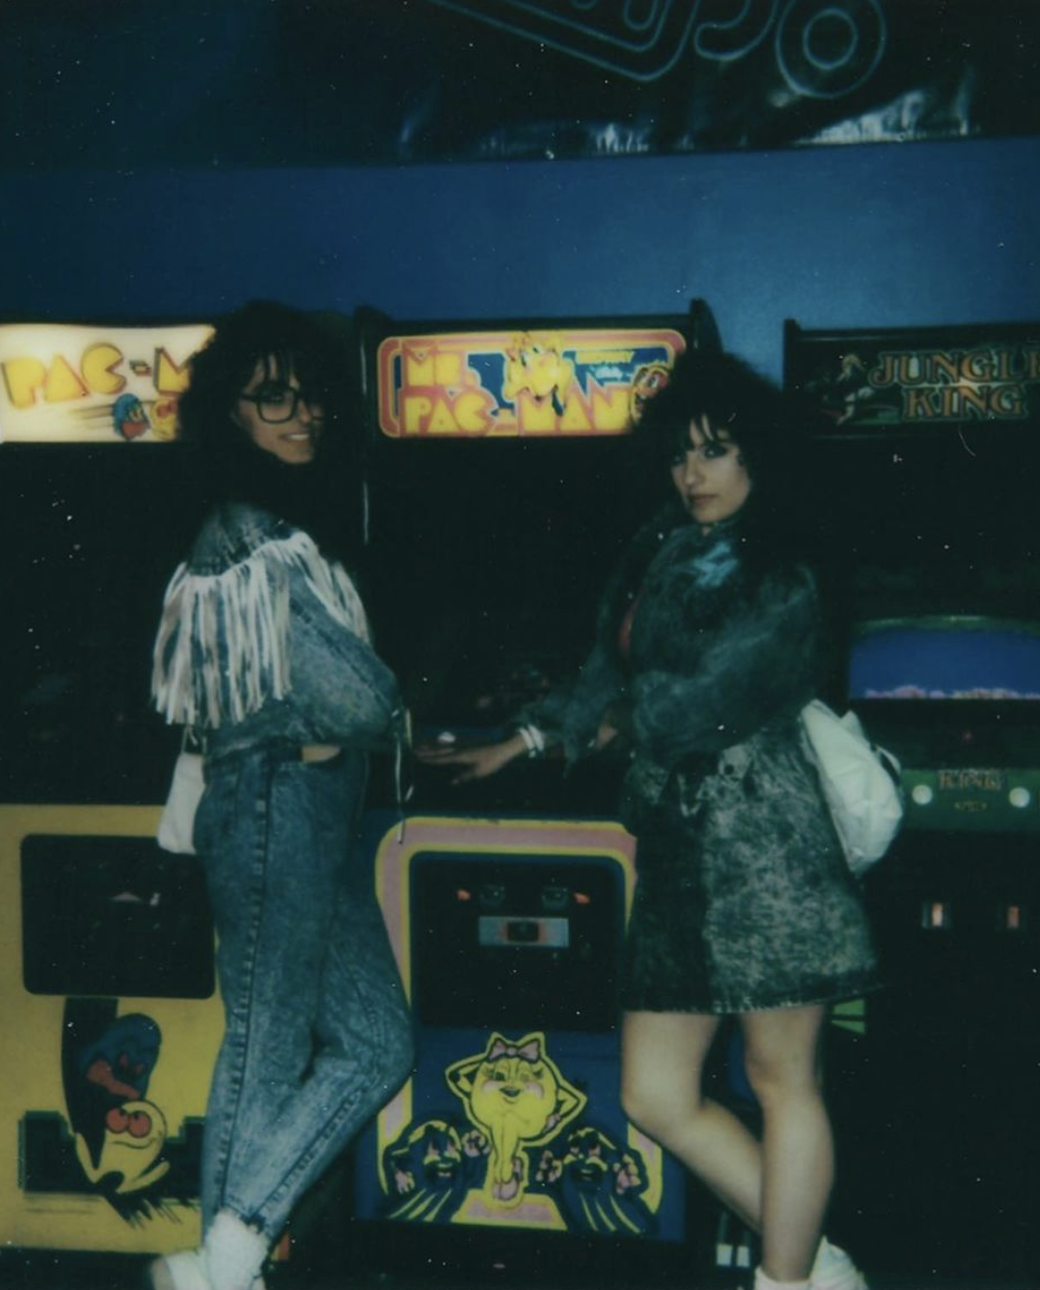 Denise Mercedes and Maria Castellanos pose in front of retro arcade game machines including Ms. Pac-Man and Pac-Man, wearing patterned denim jackets